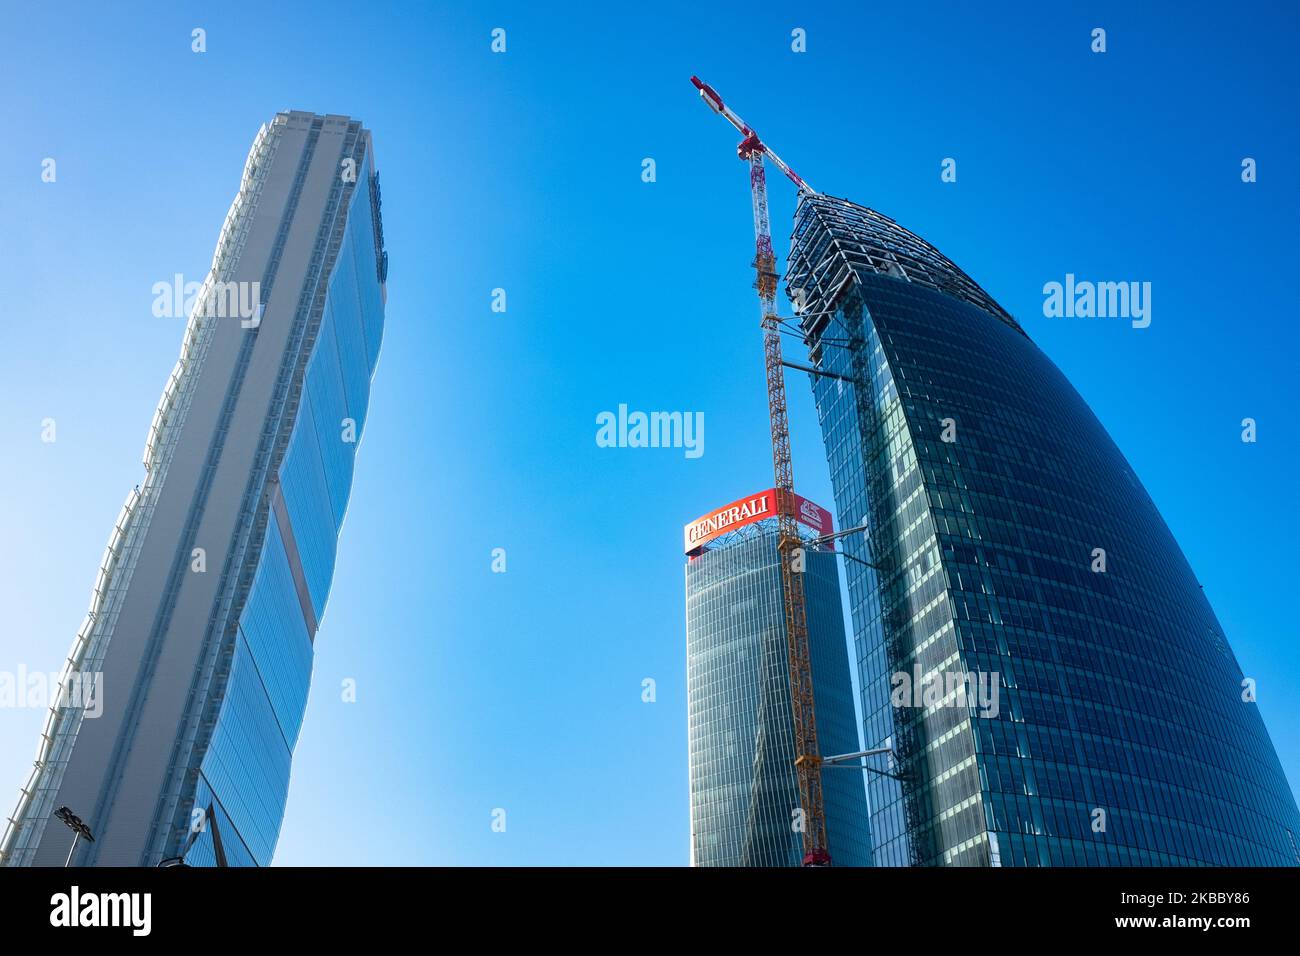 View of the three CityLife skyscrapers, Allianz Tower (L), Generali Tower (C) and Libeskind Tower (R), Italy, November 30 2019. CityLife is a residential, commercial and business district under construction situated a short distance from the old city centre of Milan, Italy; it has an area of 36.6 hectares (90 acres). The development is being carried out by a company controlled by Generali Group, that won the international tender for the redevelopment of the historic neighborhood of Fiera Milano with an offer of 523 million. The project is designed by famous architects Zaha Hadid, Arata Isozaki Stock Photo